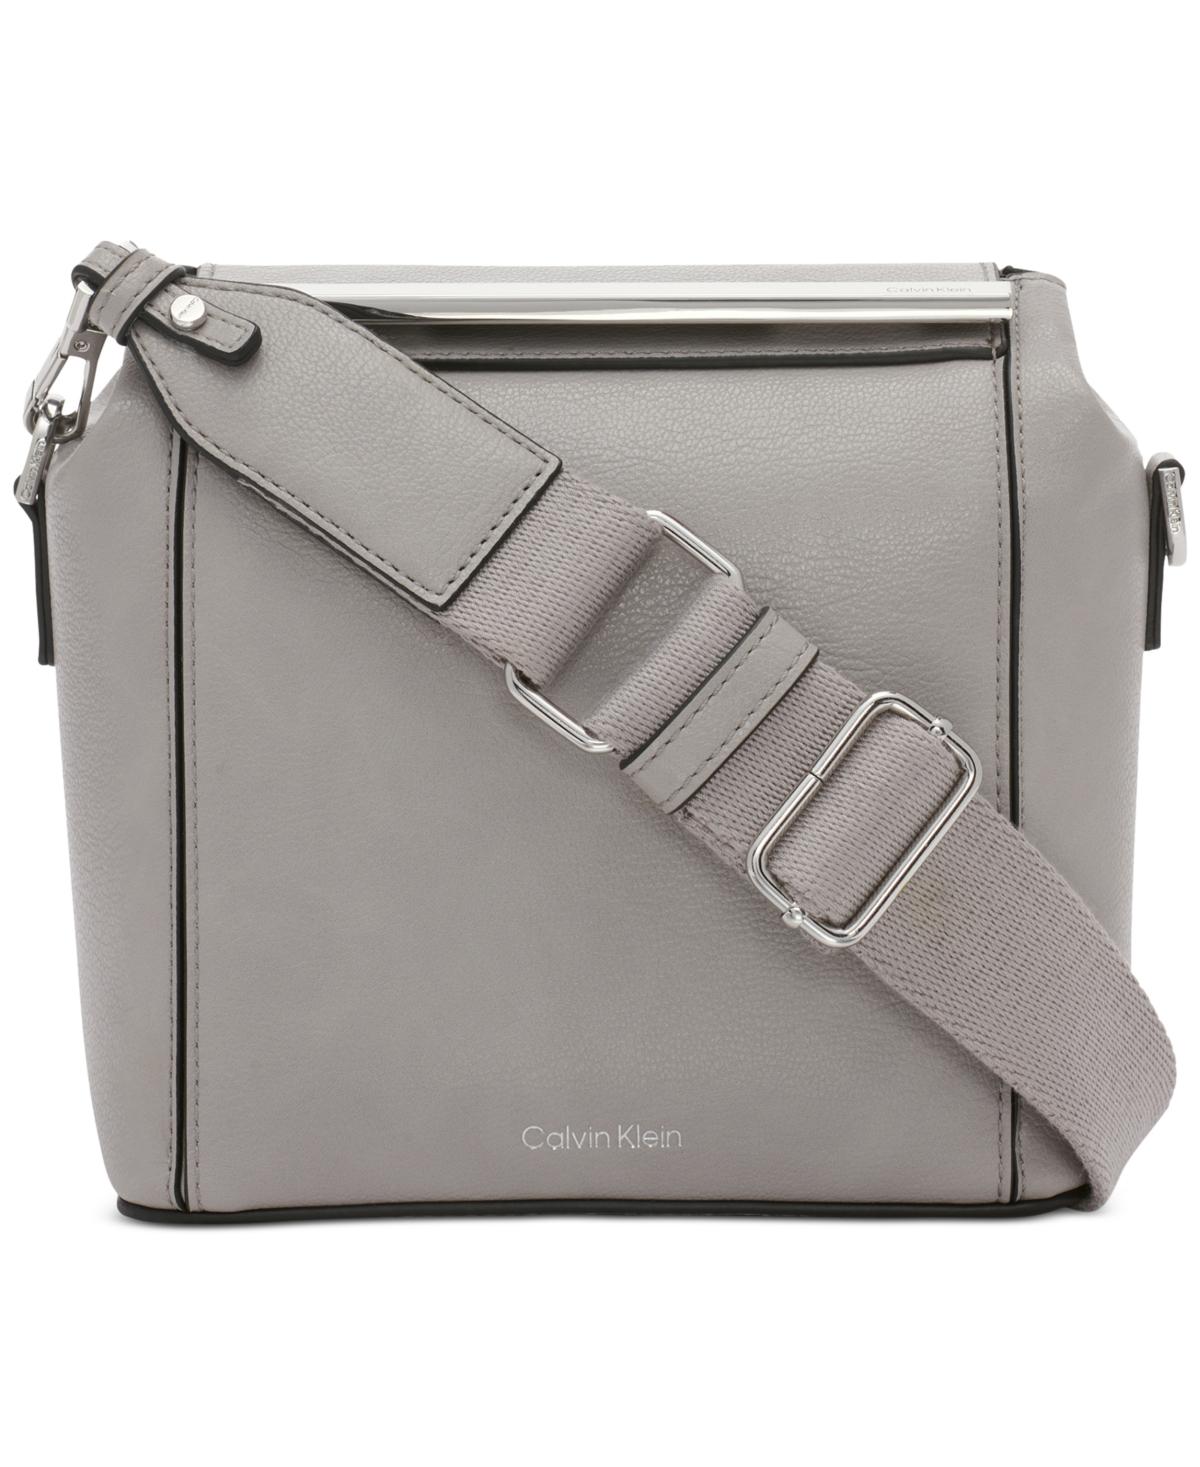 Anne Klein Small Flap Crossbody with Web Strap